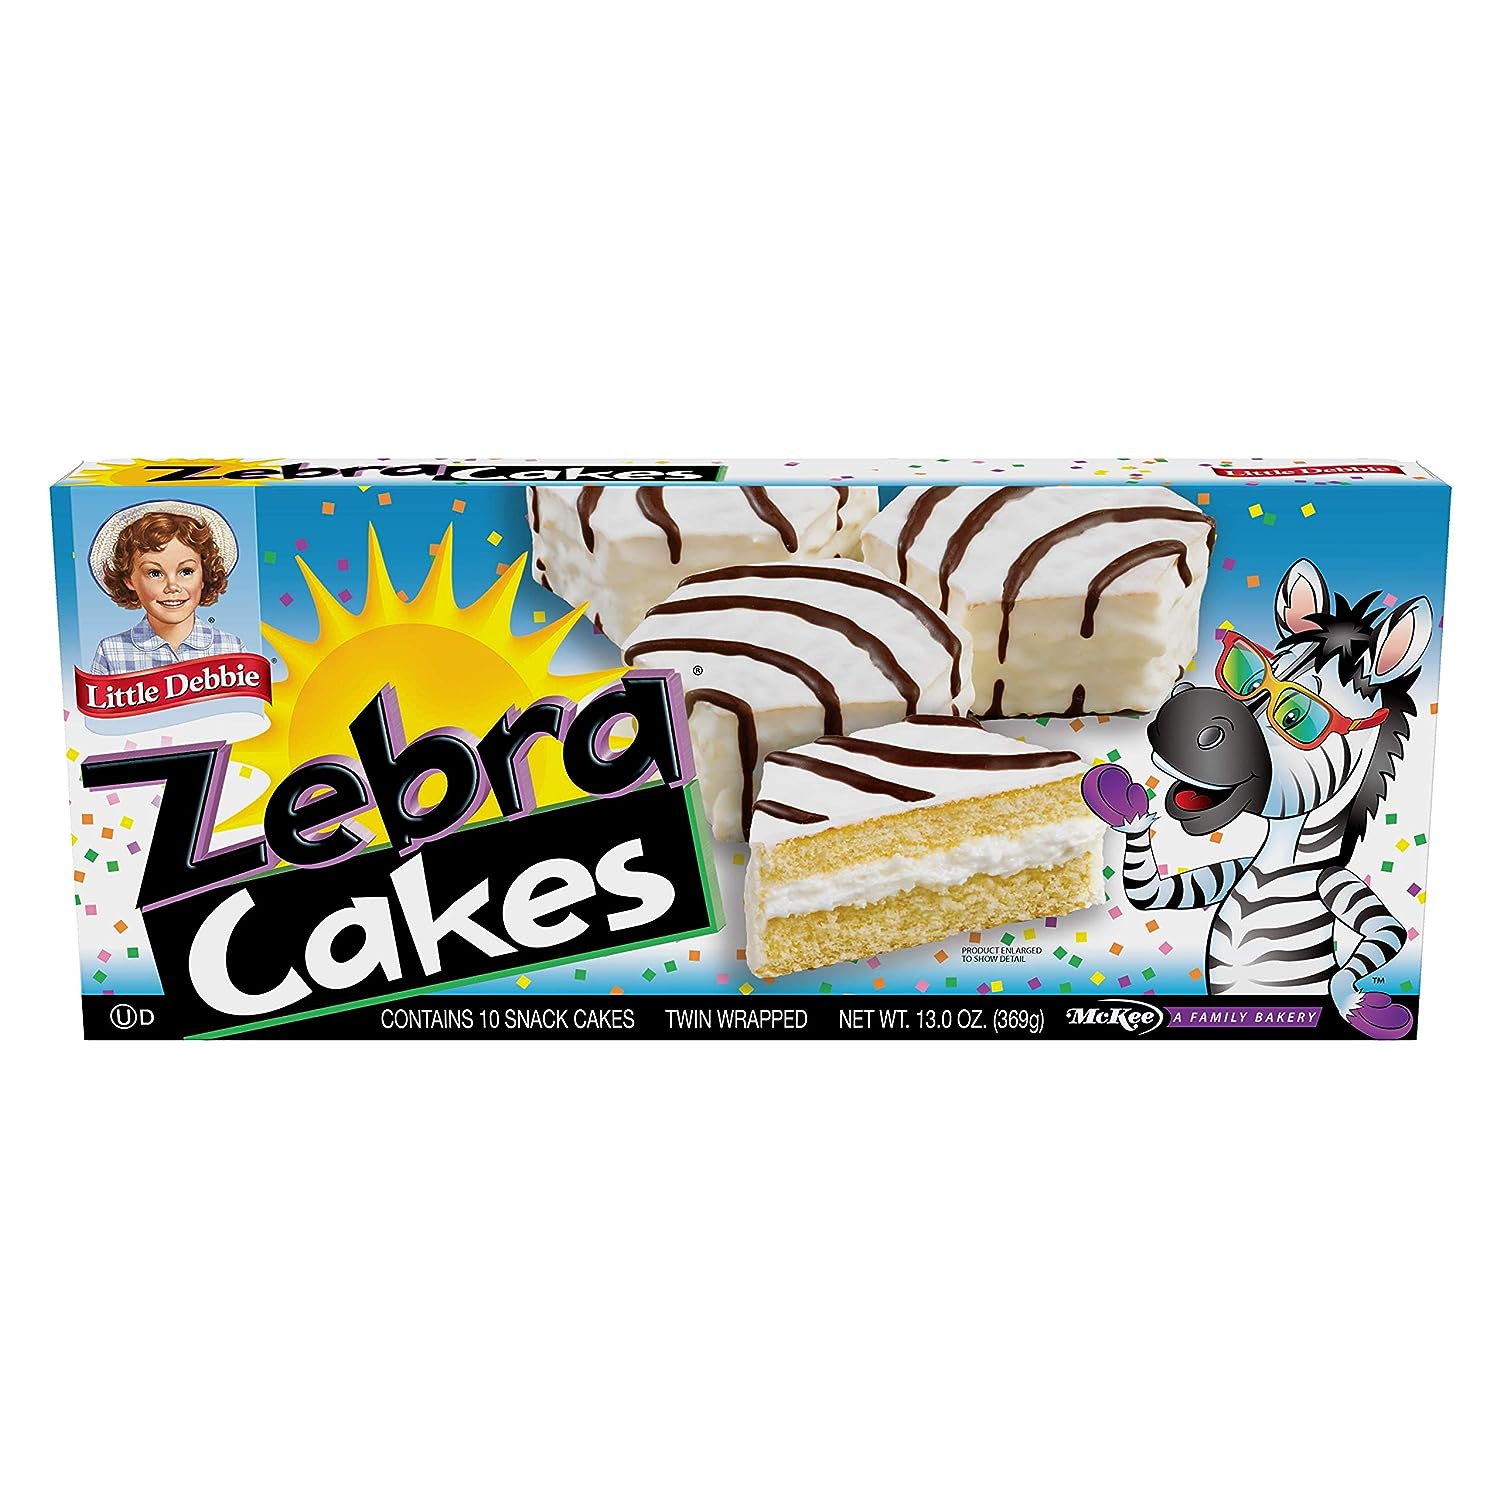 18-zebra-cakes-nutrition-facts